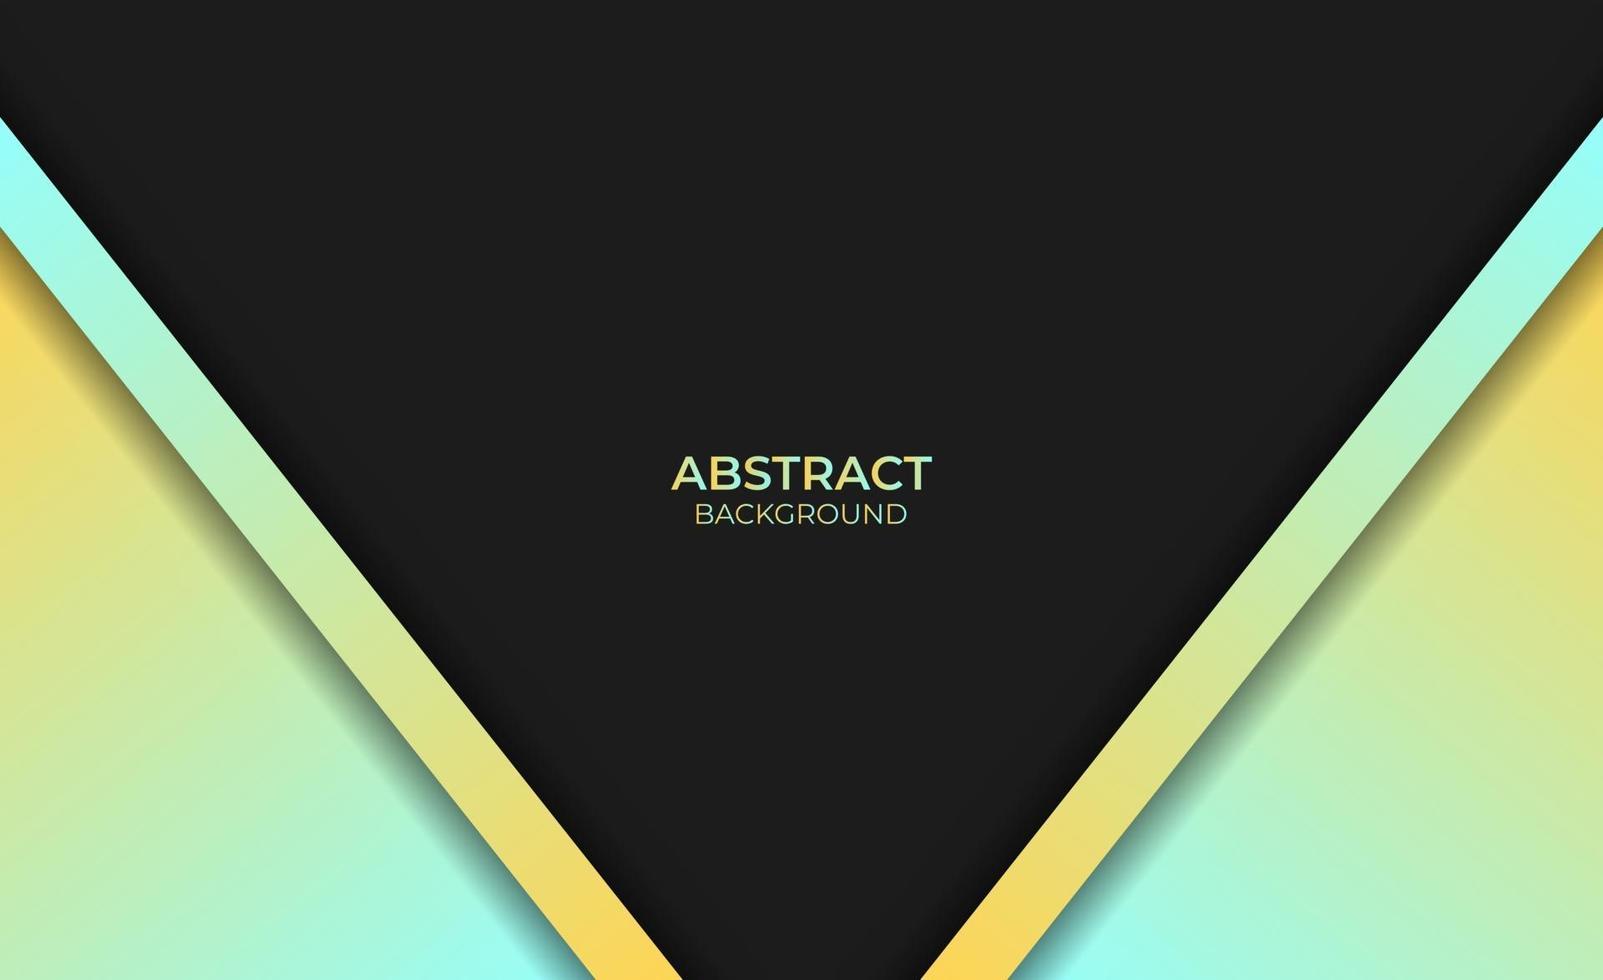 Background Design Modern Style Abstract Gradient vector